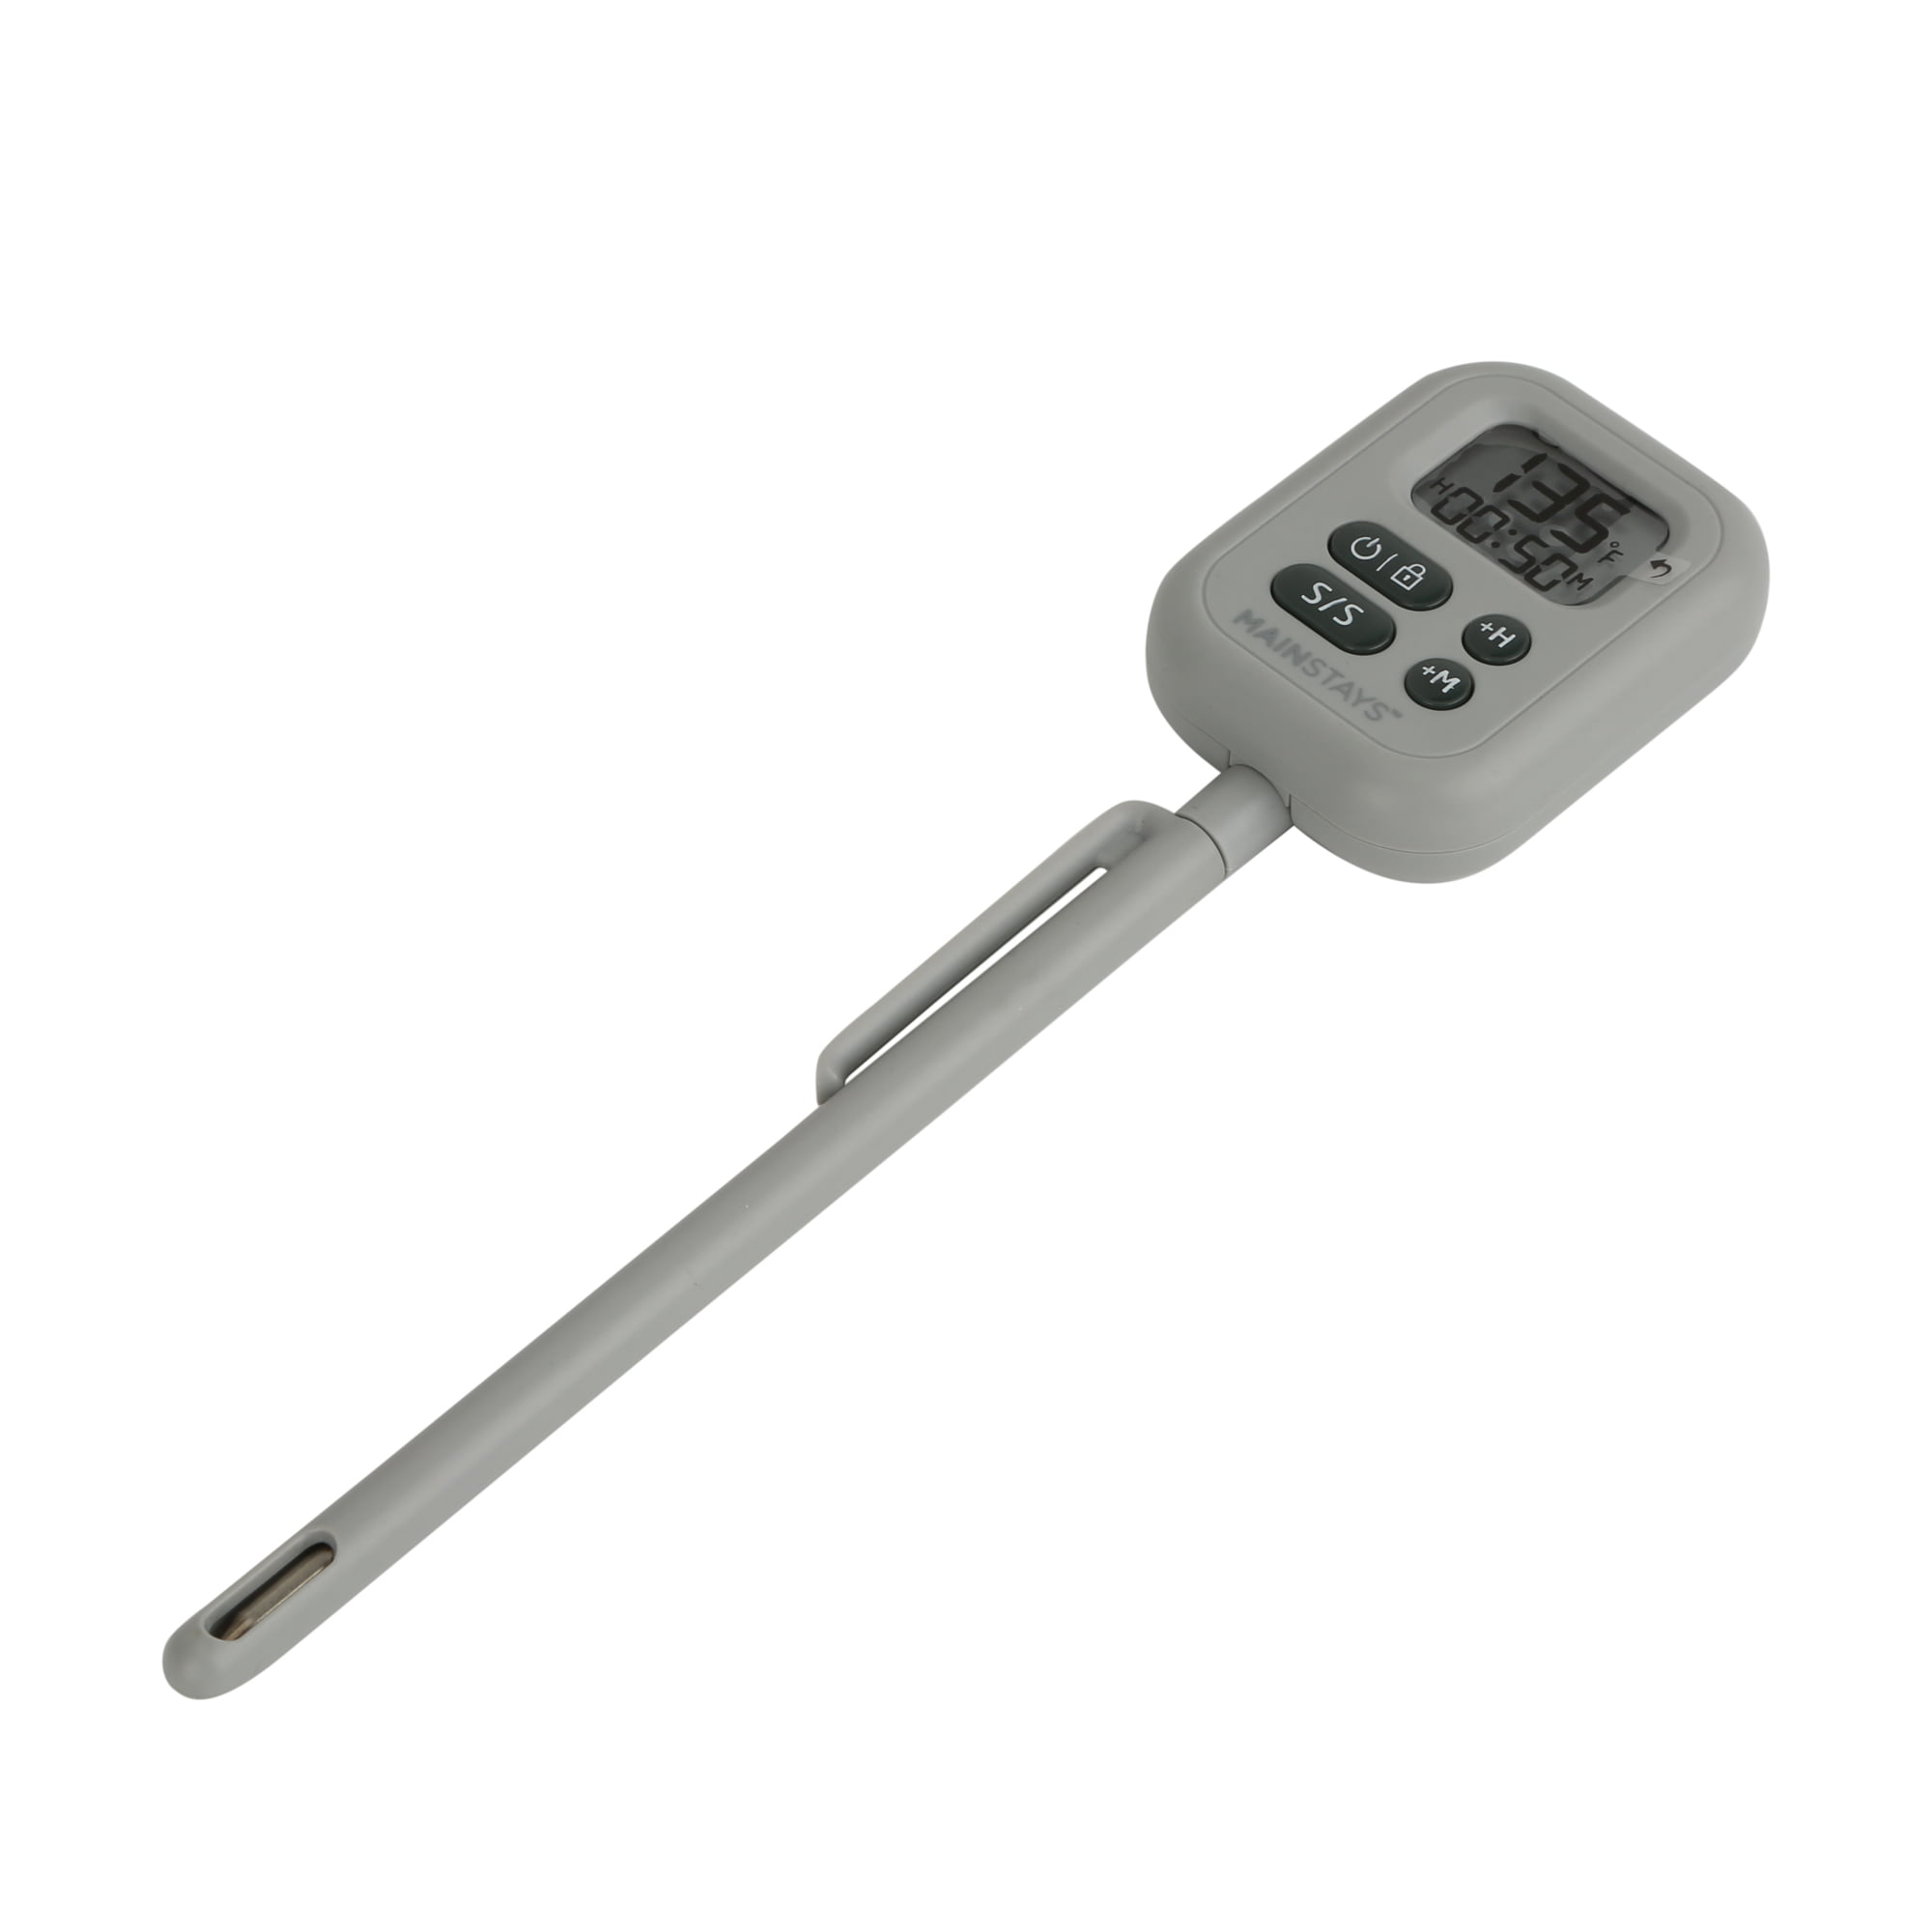 Hygiplas Pocket Food Thermometer with Dial - F346 - Buy Online at